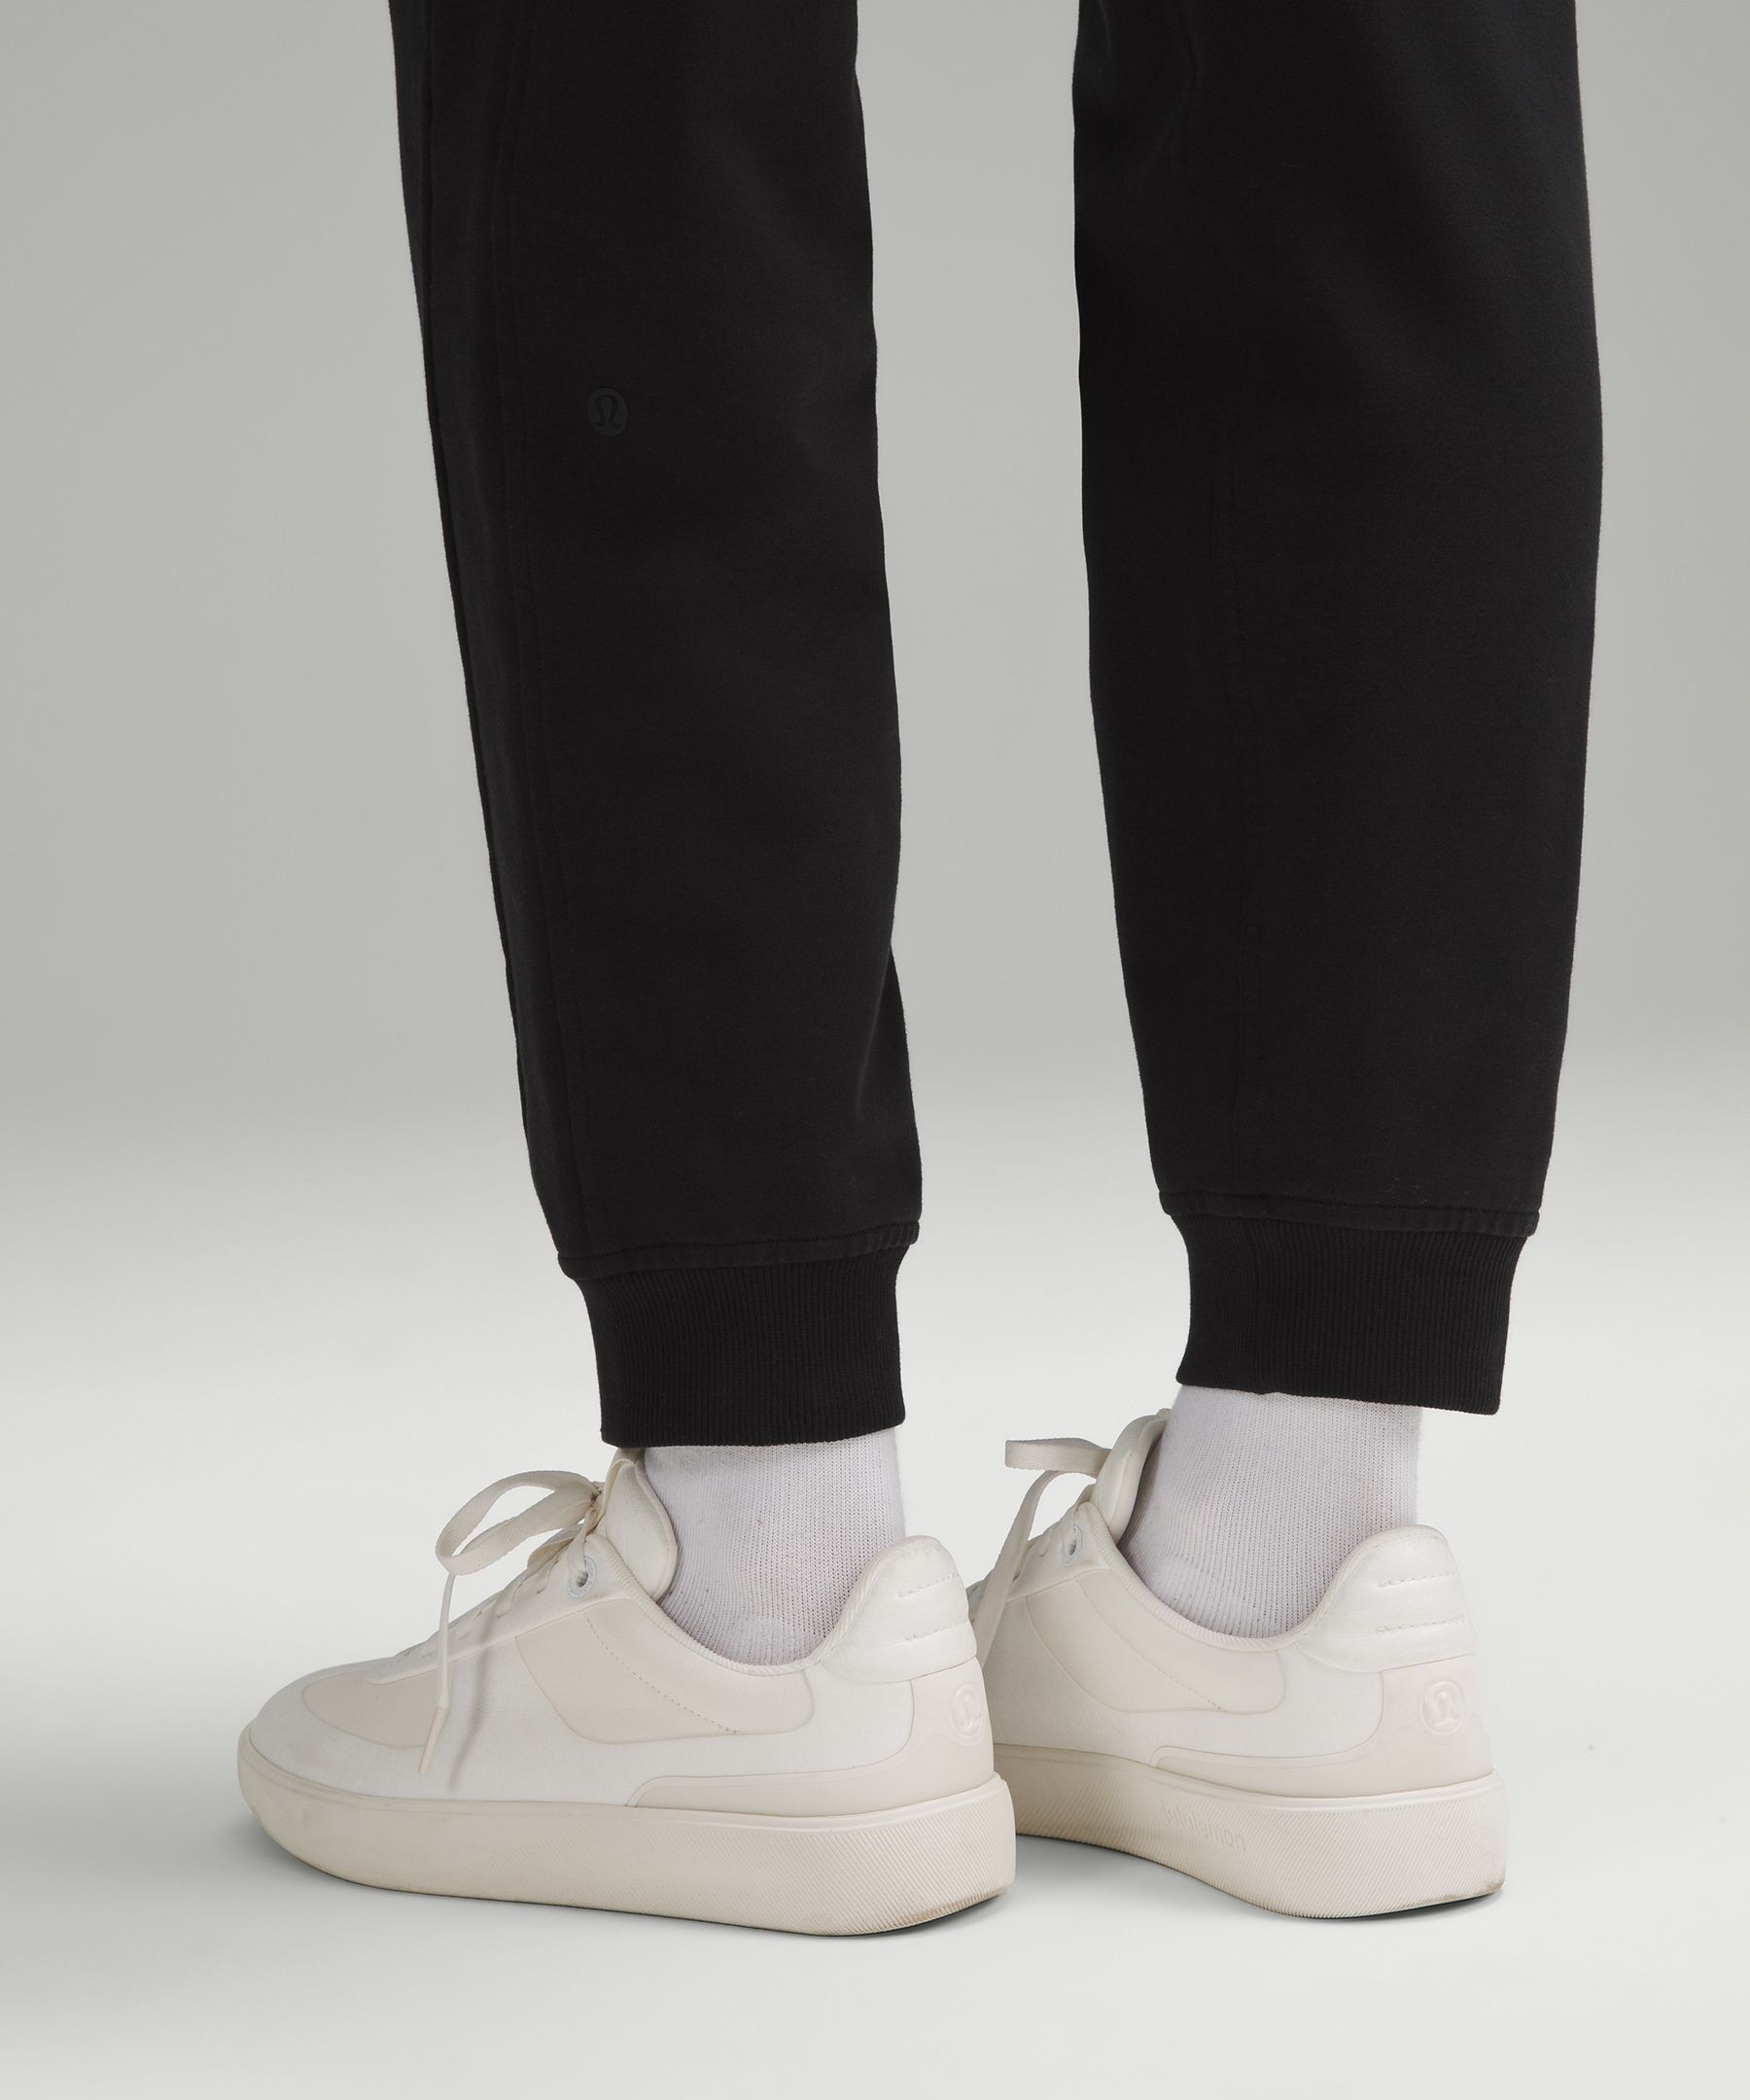 Lululemon athletica Scuba High-Rise French Terry Jogger